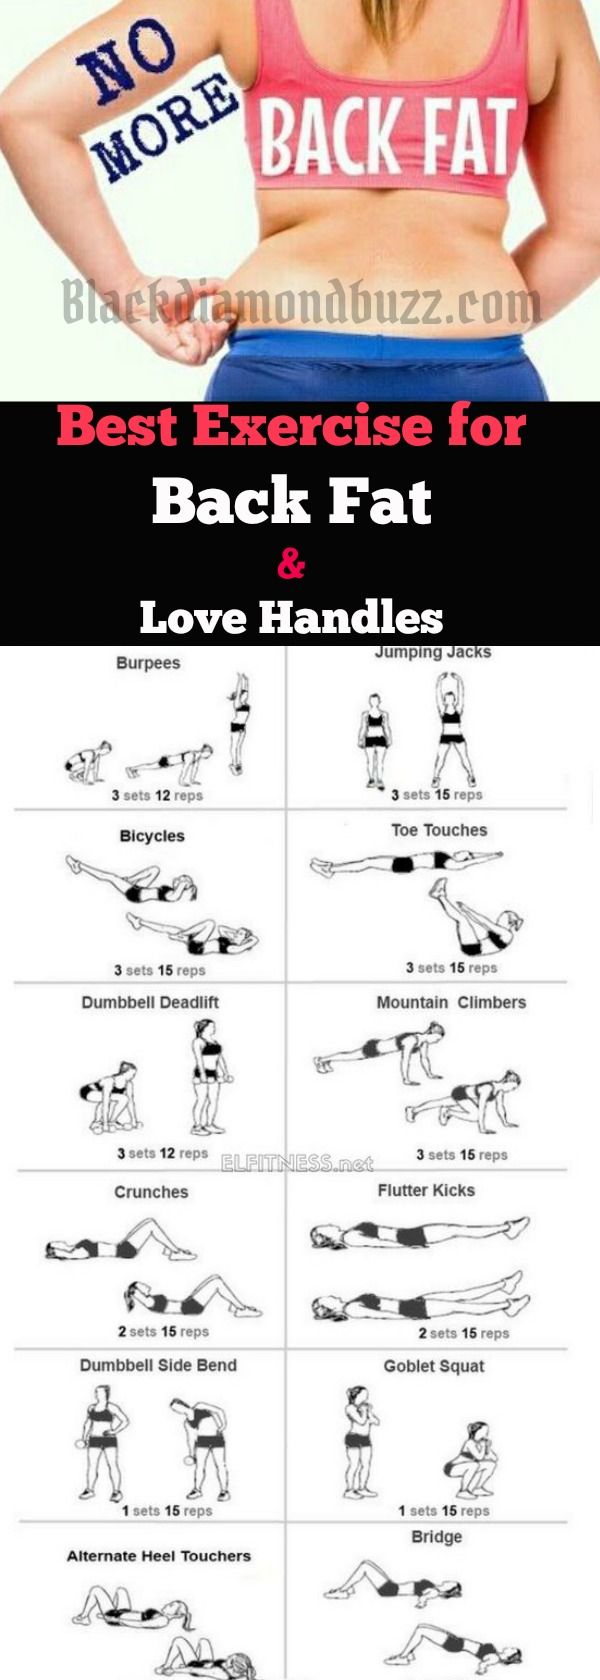 Workout Plans : Best exercises for back fat and love handles for women ...